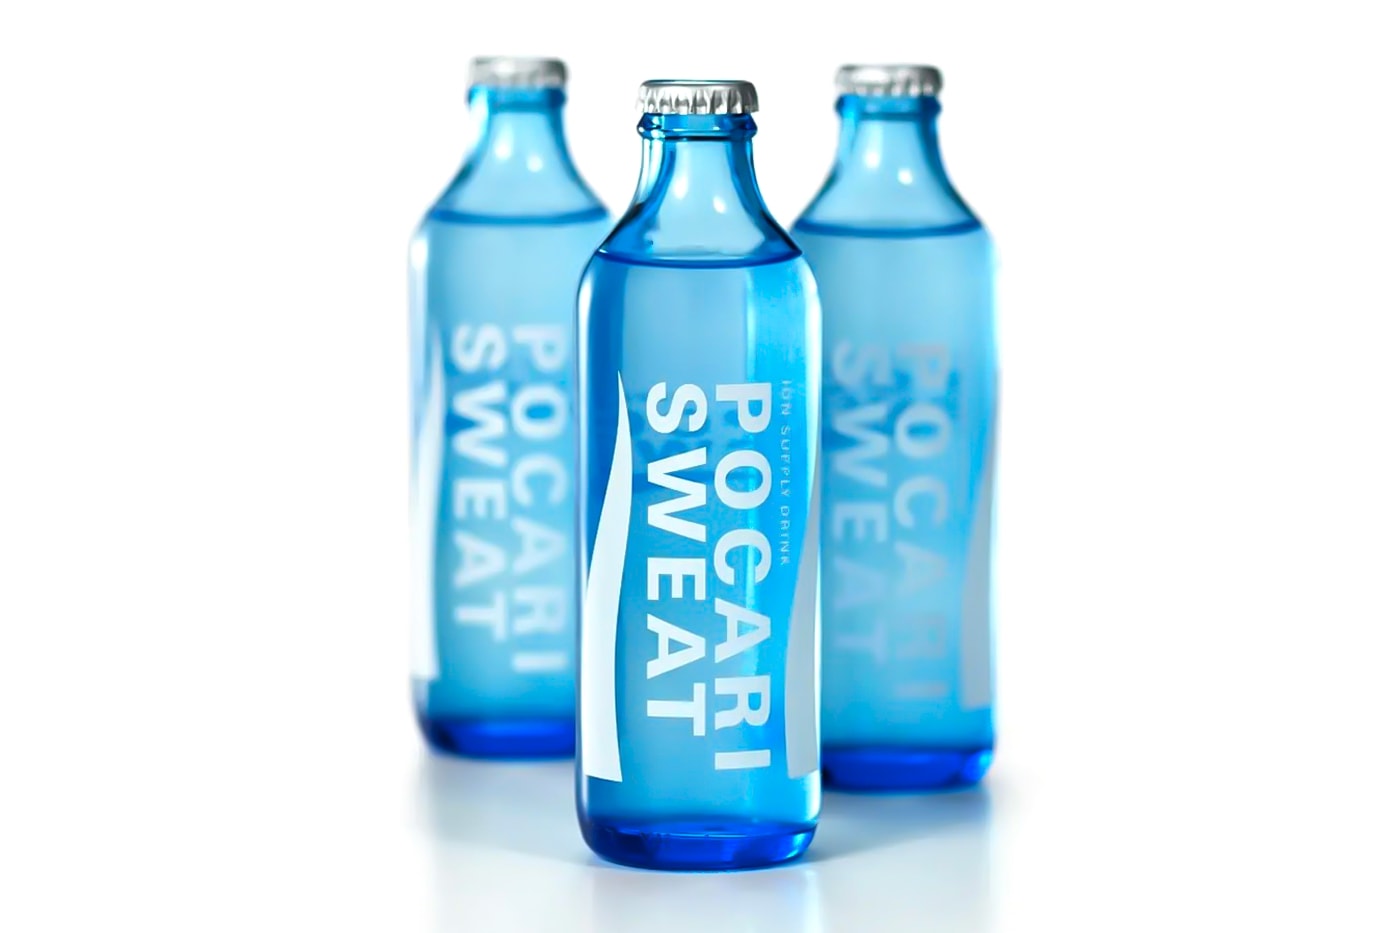 Pocari Sweat Recyclable Glass Bottles eco friendly sustainable metal cap blue white loop aeon release info date price july 12